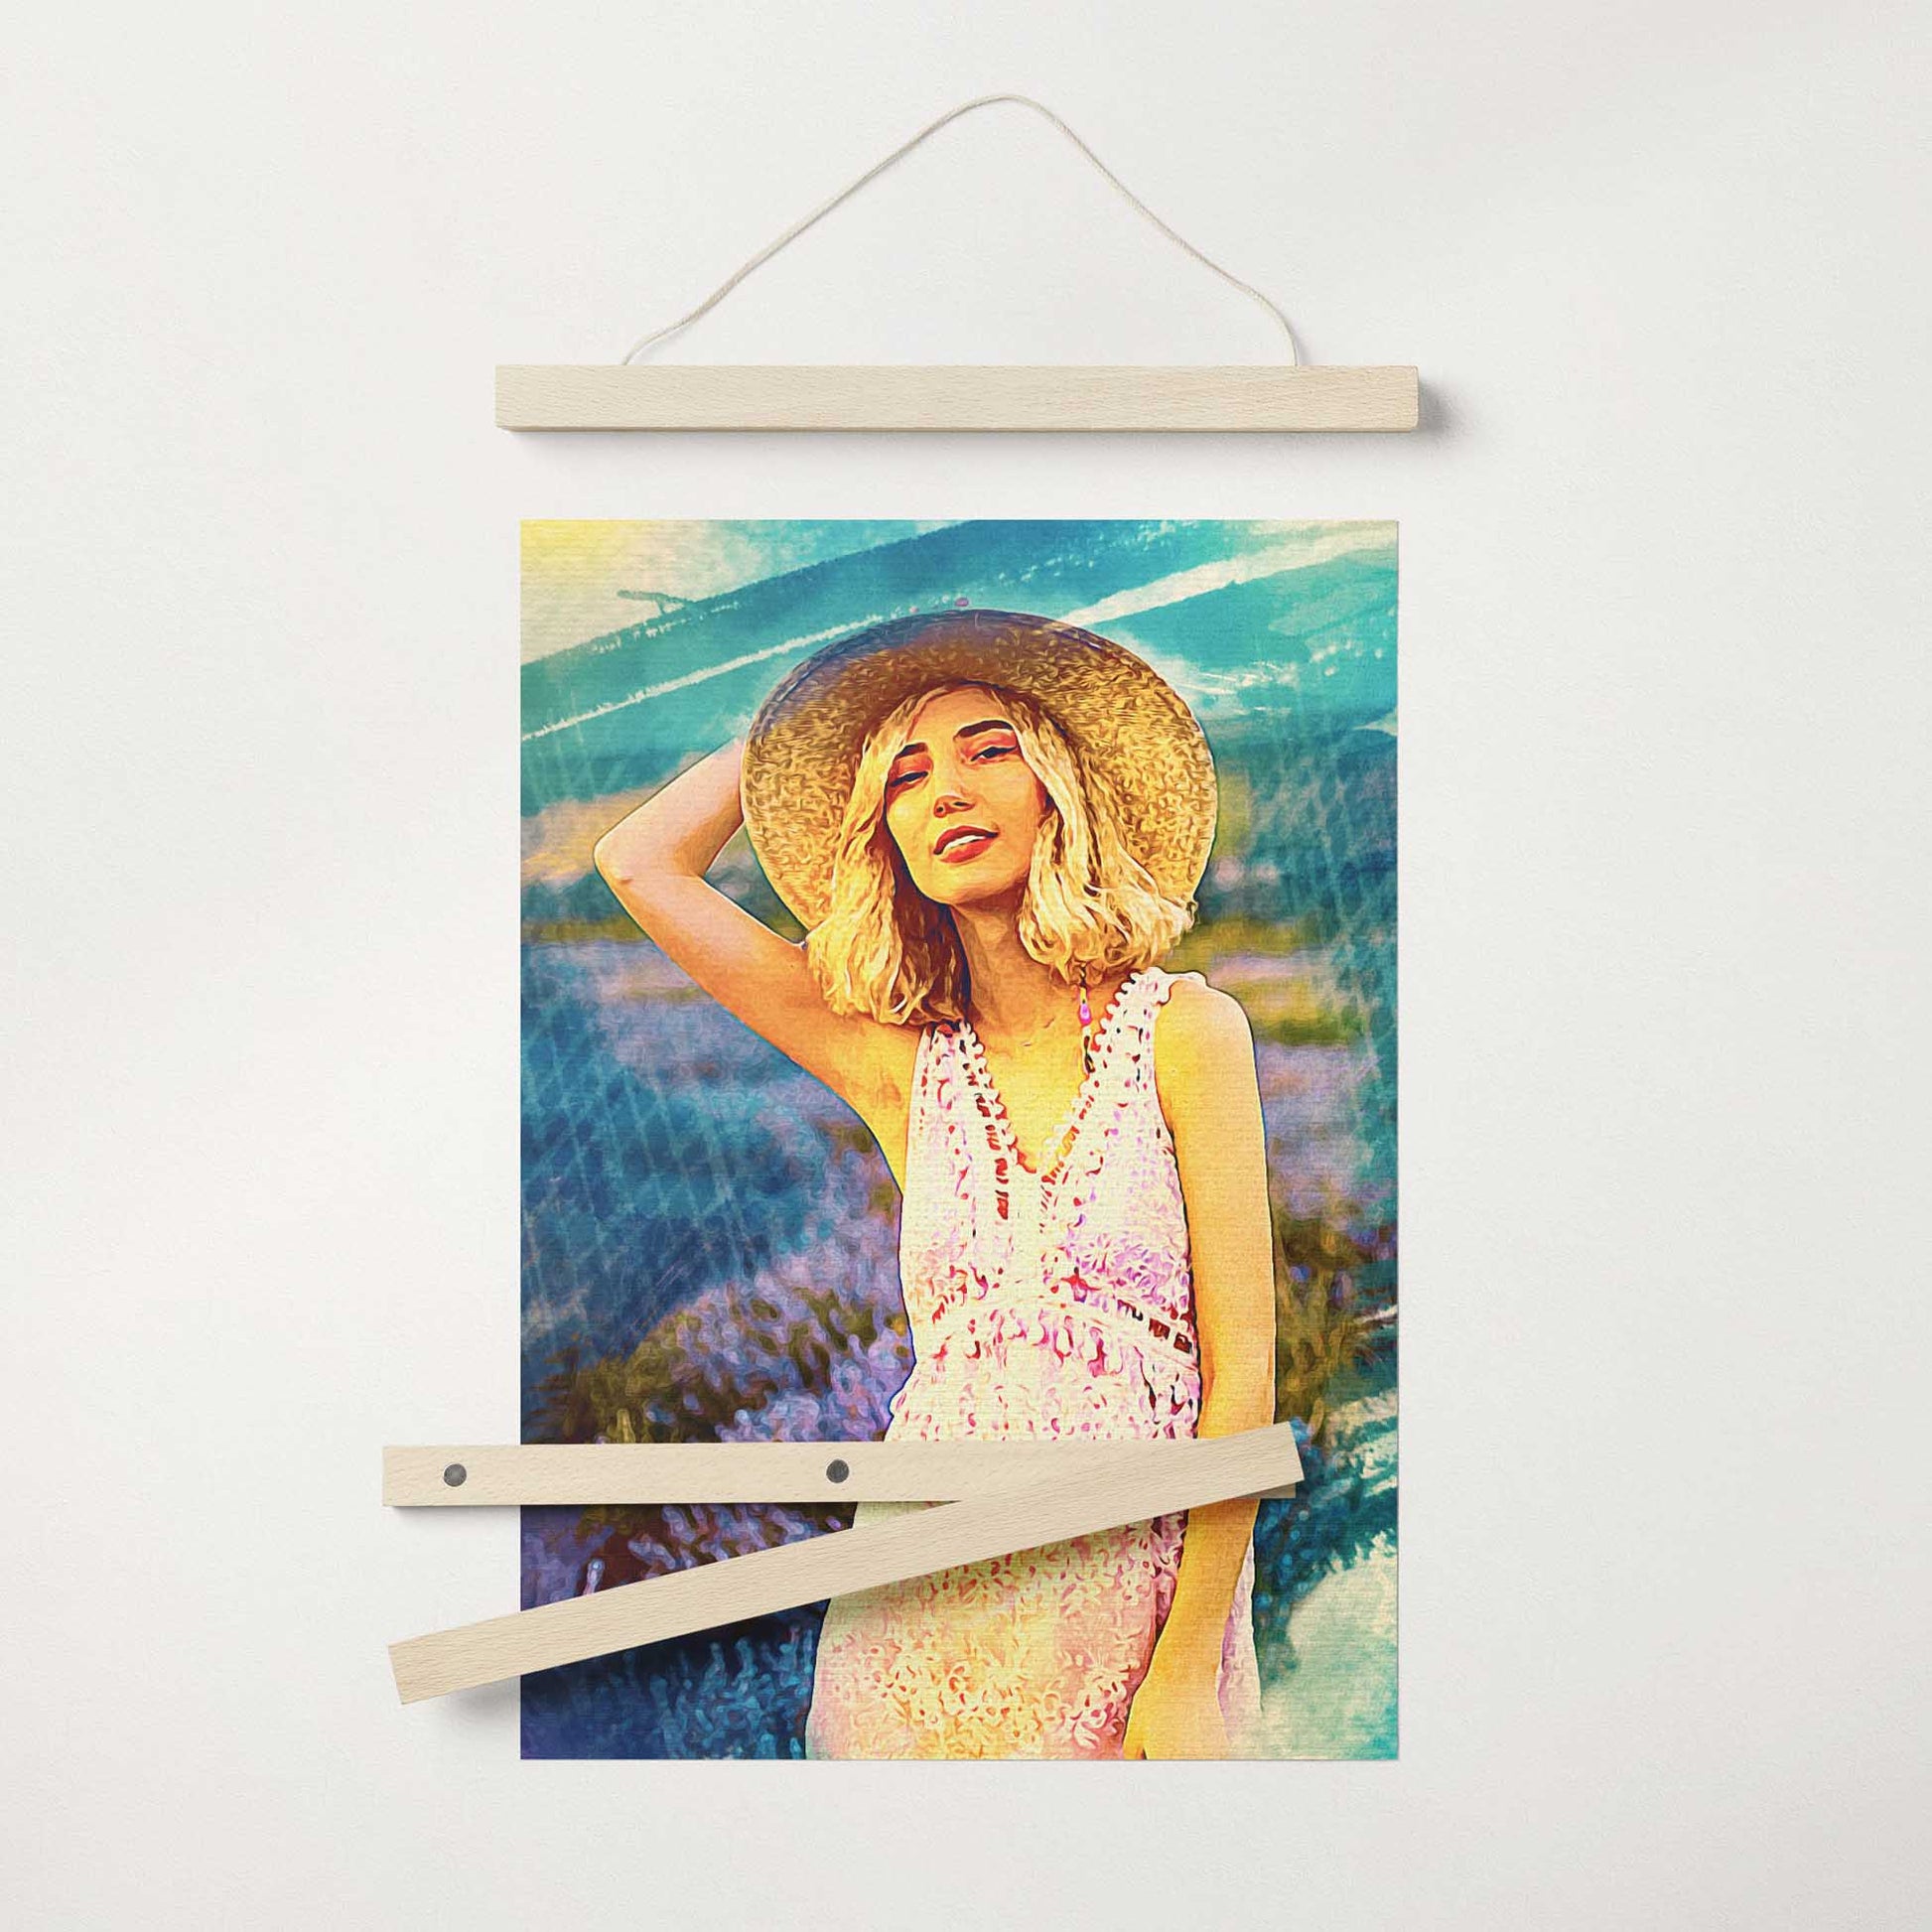 Immerse yourself in the imaginative world of the Personalised Artistic Brush Poster Hanger. Crafted from your photo in a captivating watercolour style, this custom piece showcases vibrant colors and expressive brush strokes 